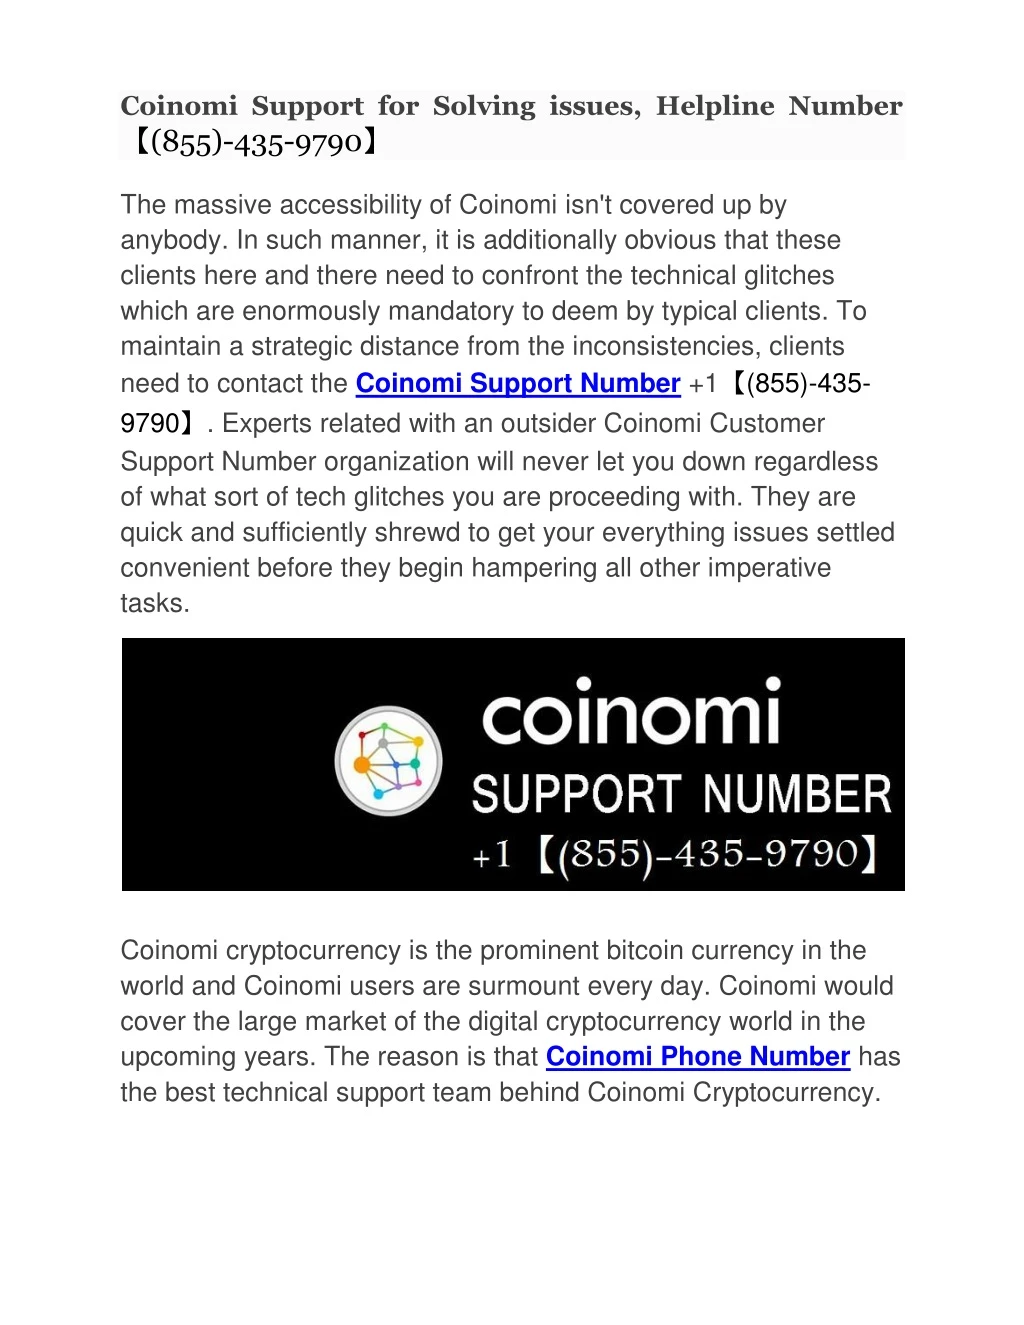 coinomi support for solving issues helpline